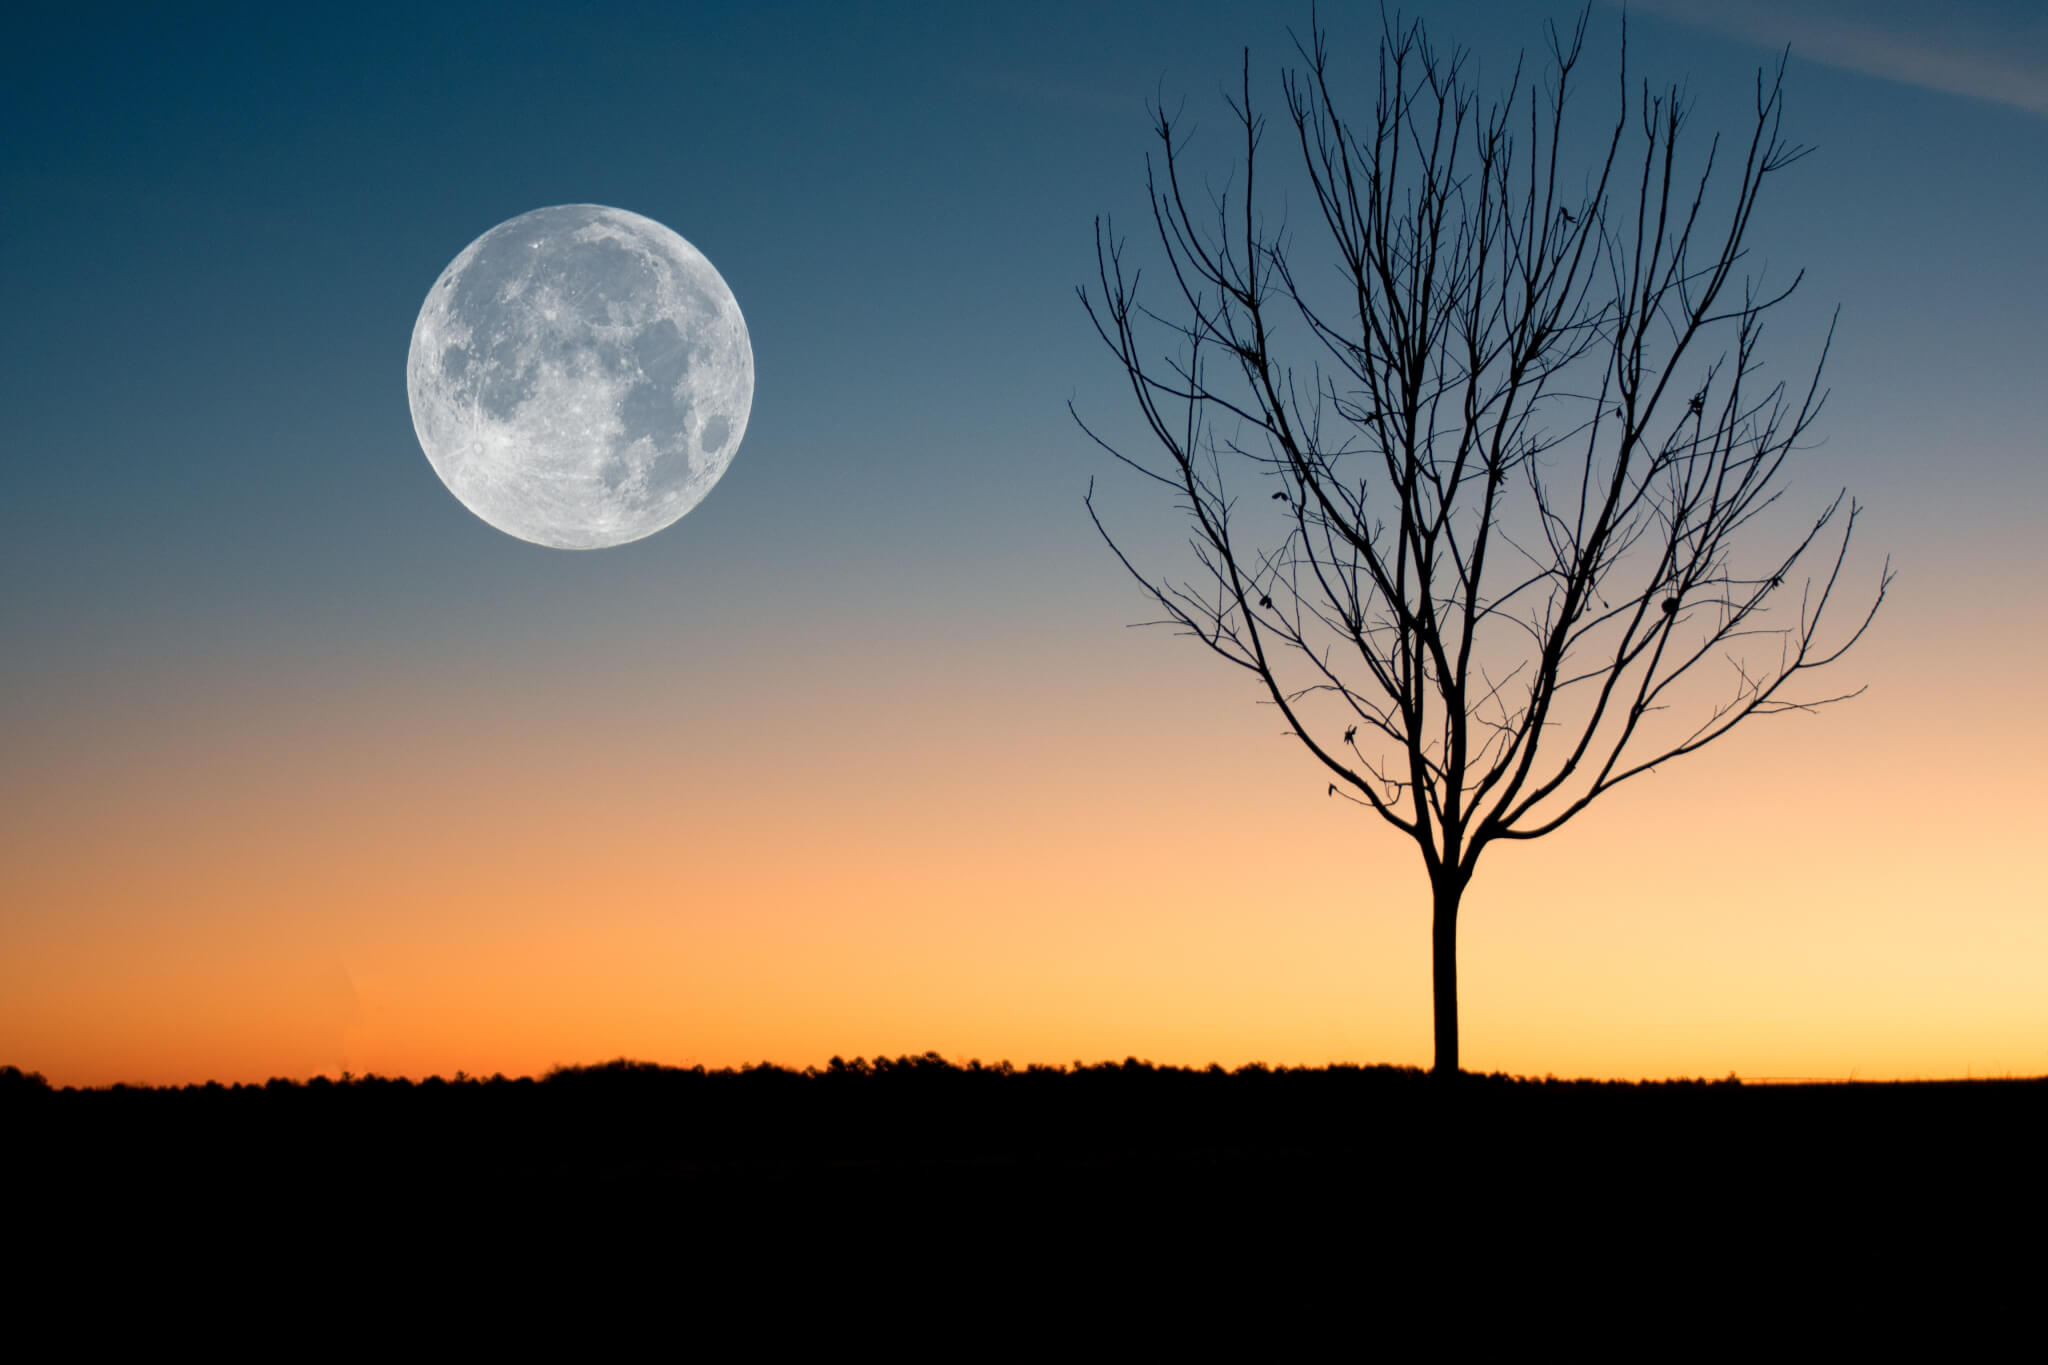 Full moons influence sleep patterns, cause people to go to bed later and get up early